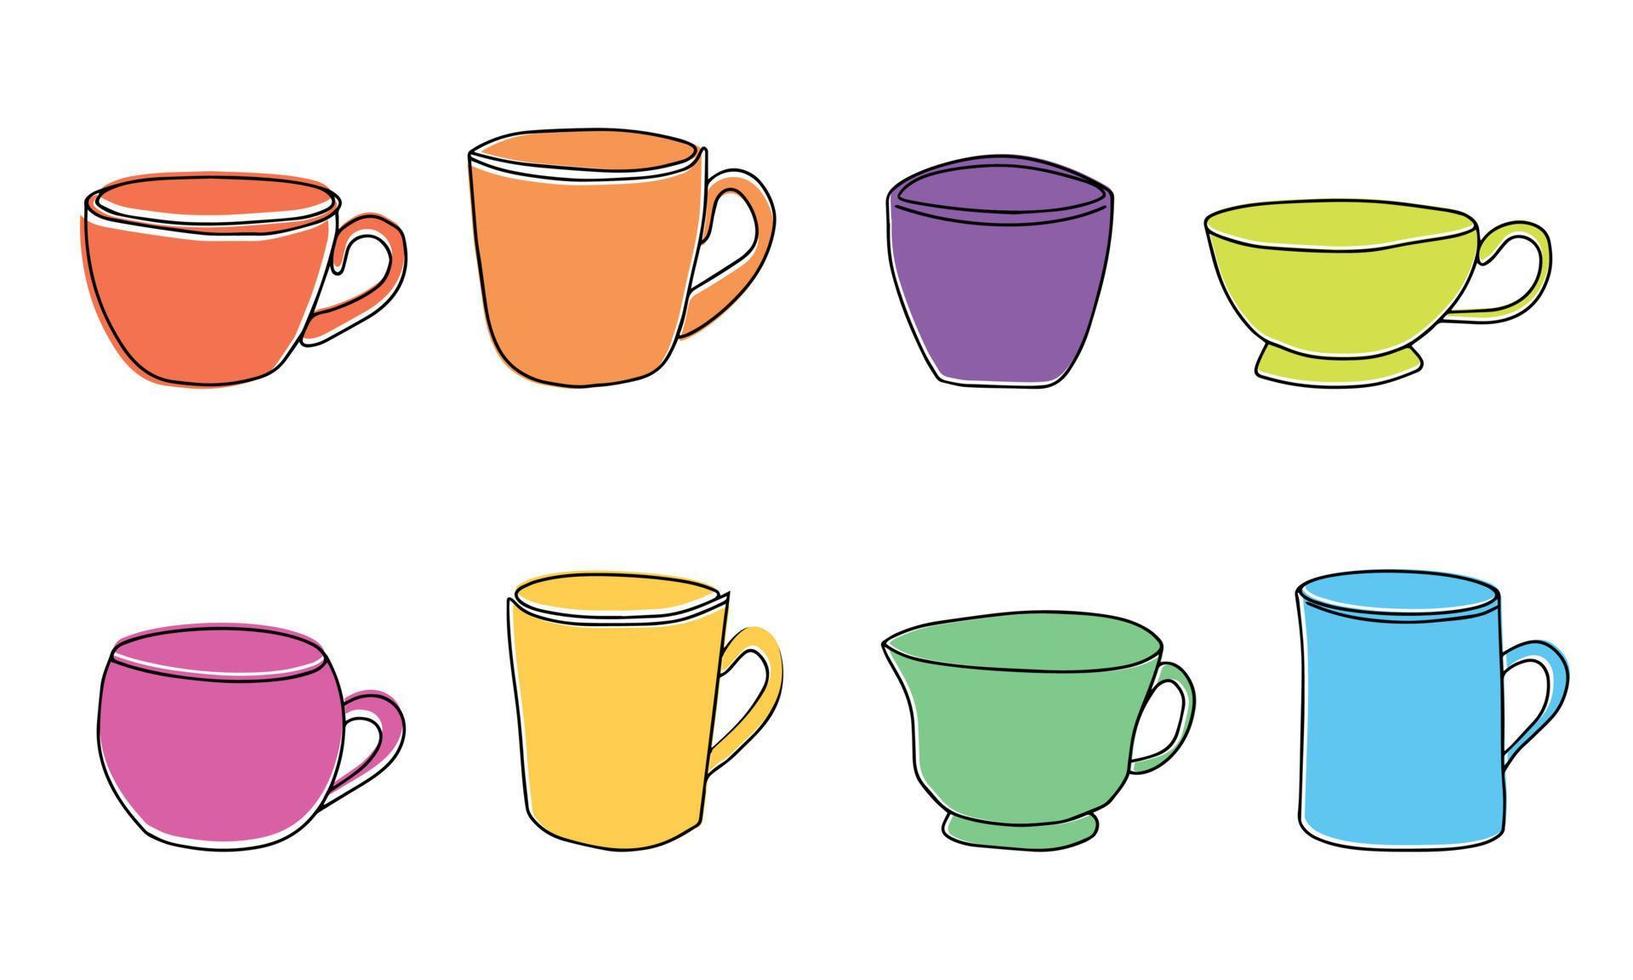 https://static.vecteezy.com/system/resources/previews/010/951/951/non_2x/set-of-cup-for-coffee-or-tea-color-cups-in-line-art-style-with-color-hand-draw-illustration-vector.jpg